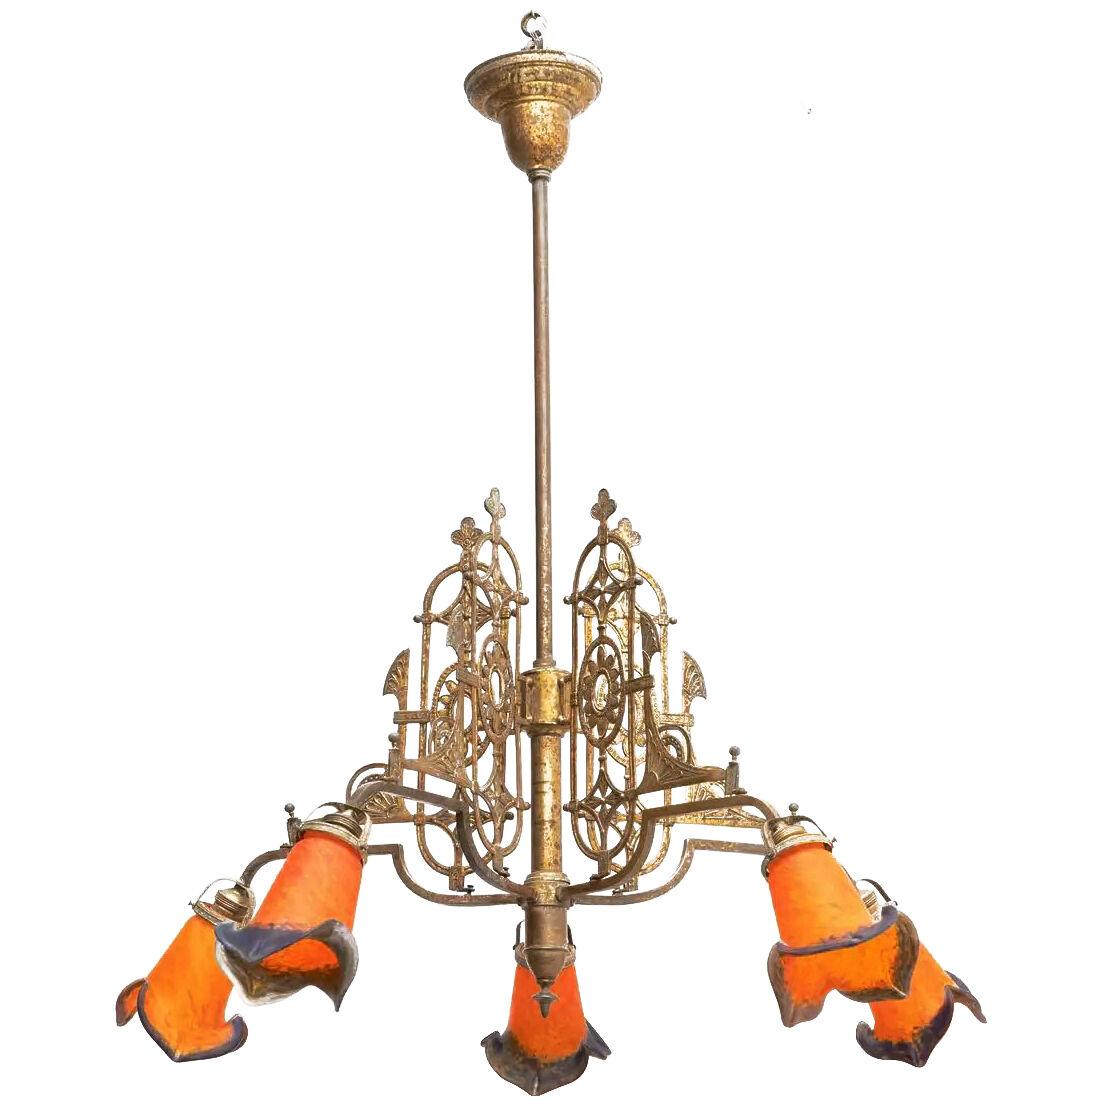 Vintage French Brass and Glass Ceiling Lamp circa 1930